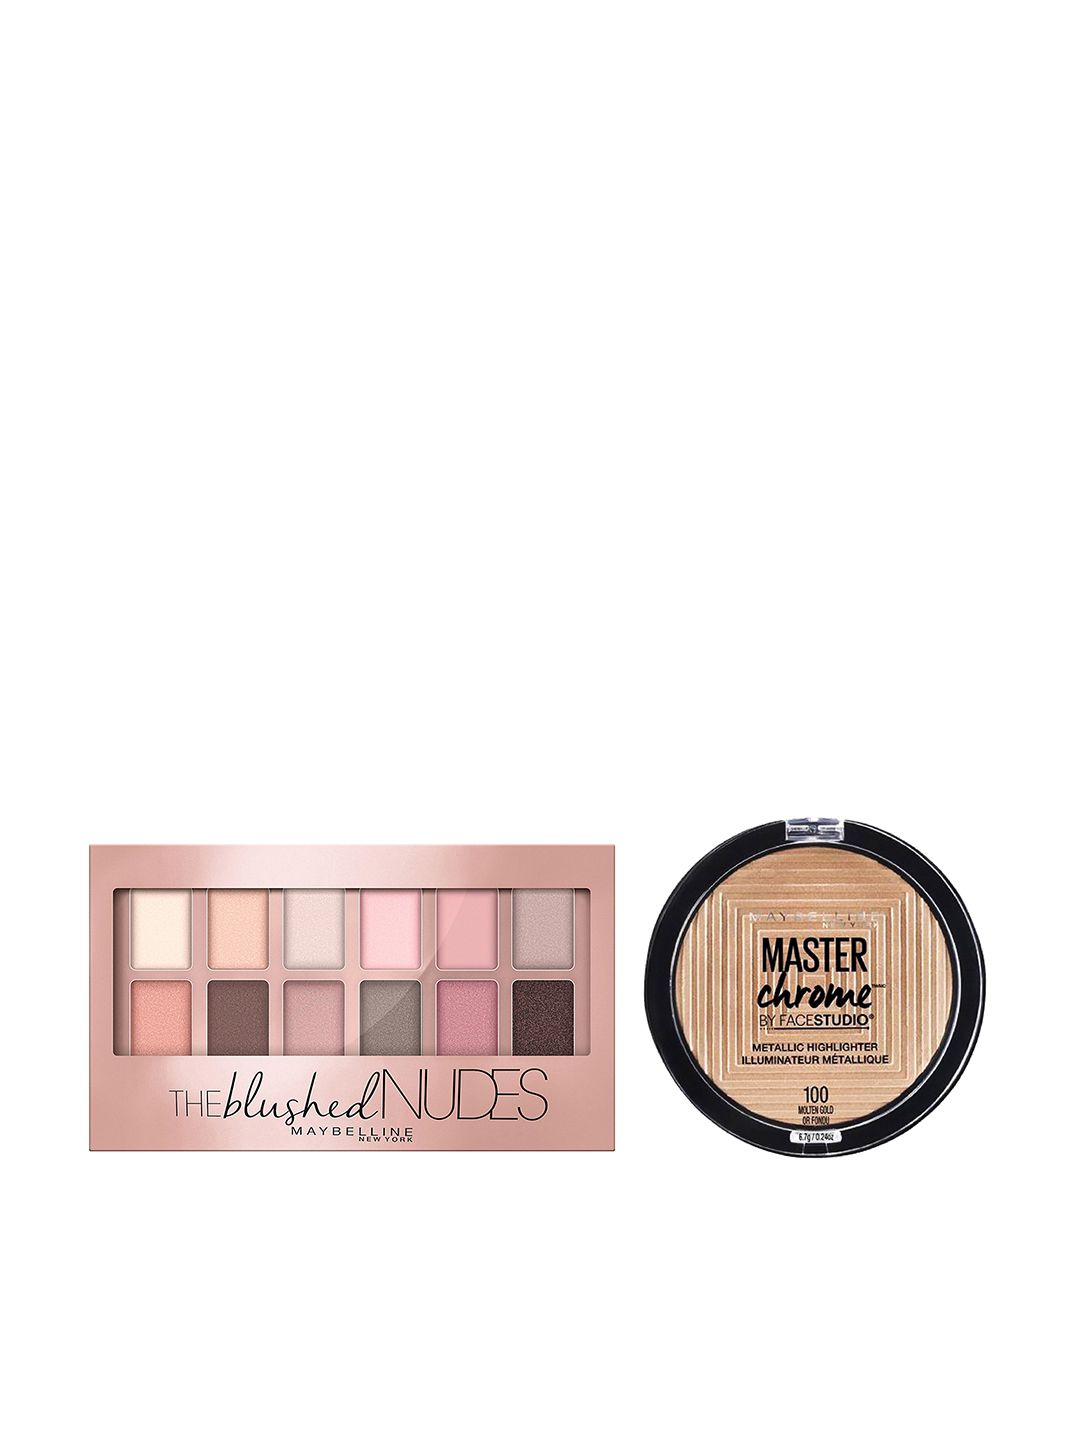 Maybelline Master Chrome FaceStudio Highlighter & The Blushed Nudes Eye Shadow Palette Set Price in India